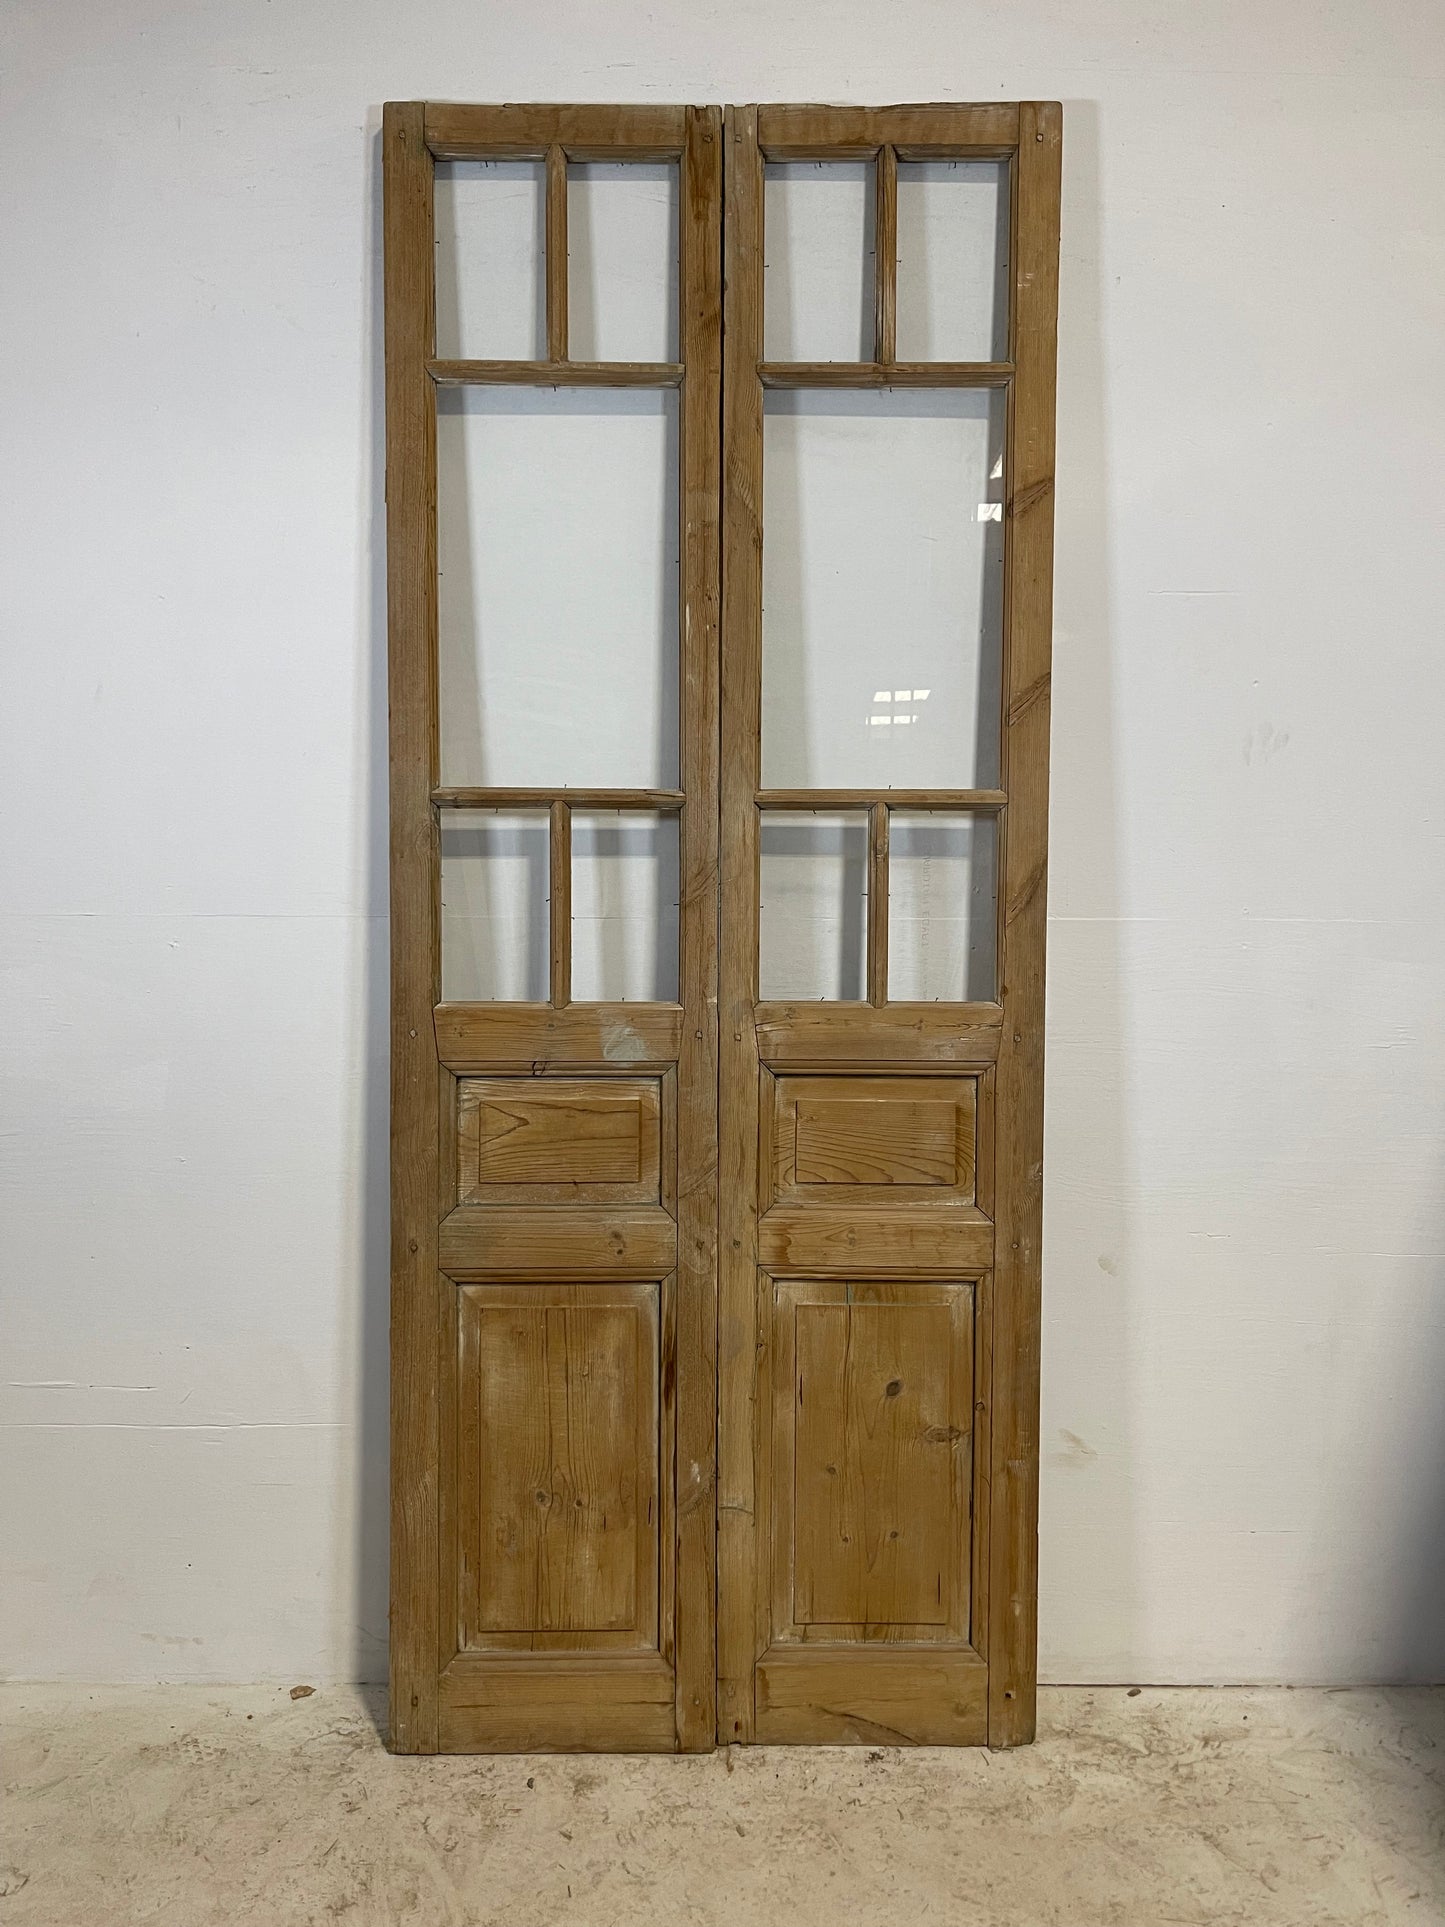 Antique French panel doors with glass (93.5 x 37.5) L222